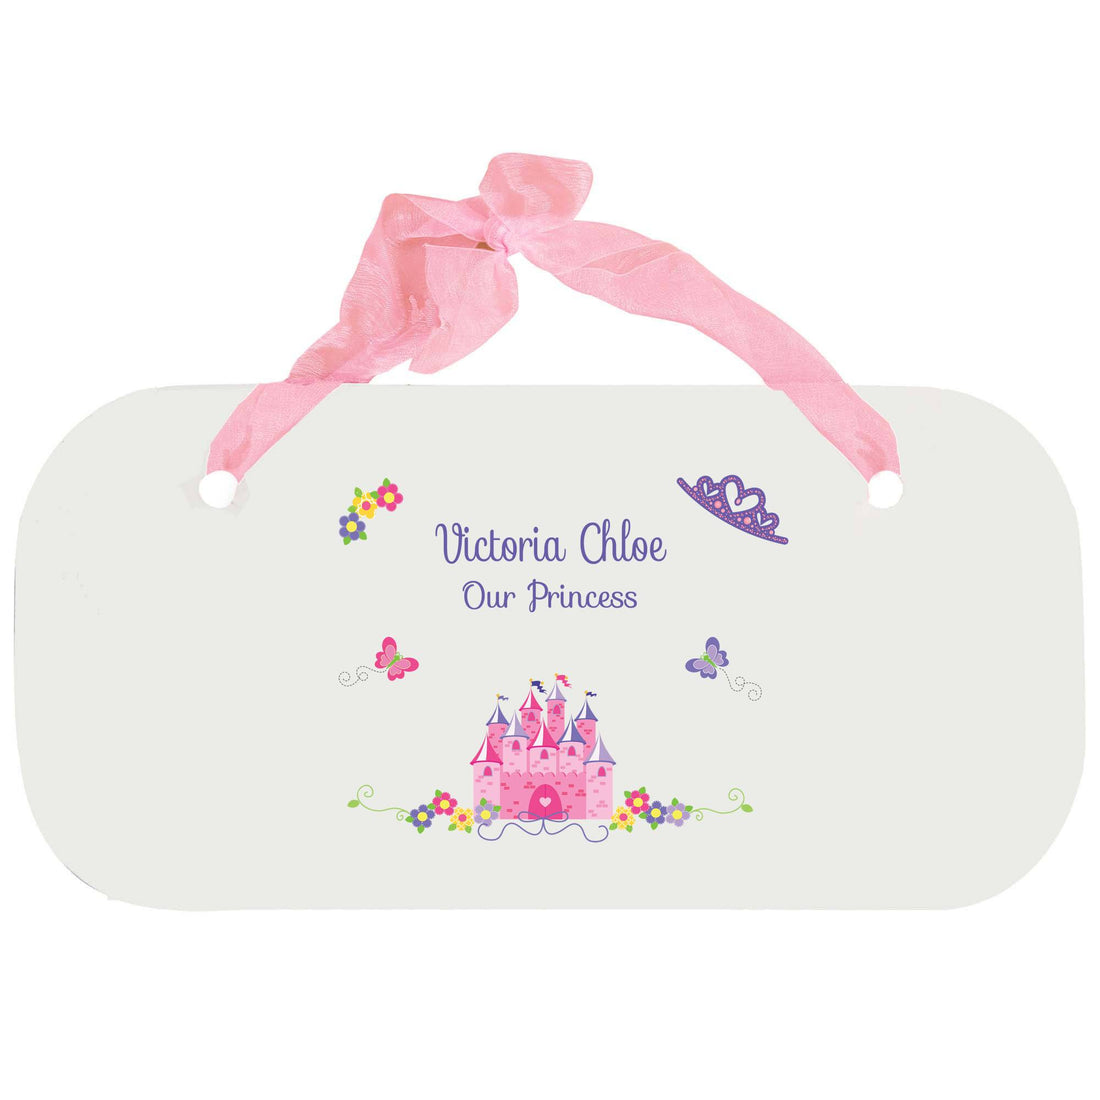 Personalized Girls Wall Plaque with Princess Castle design